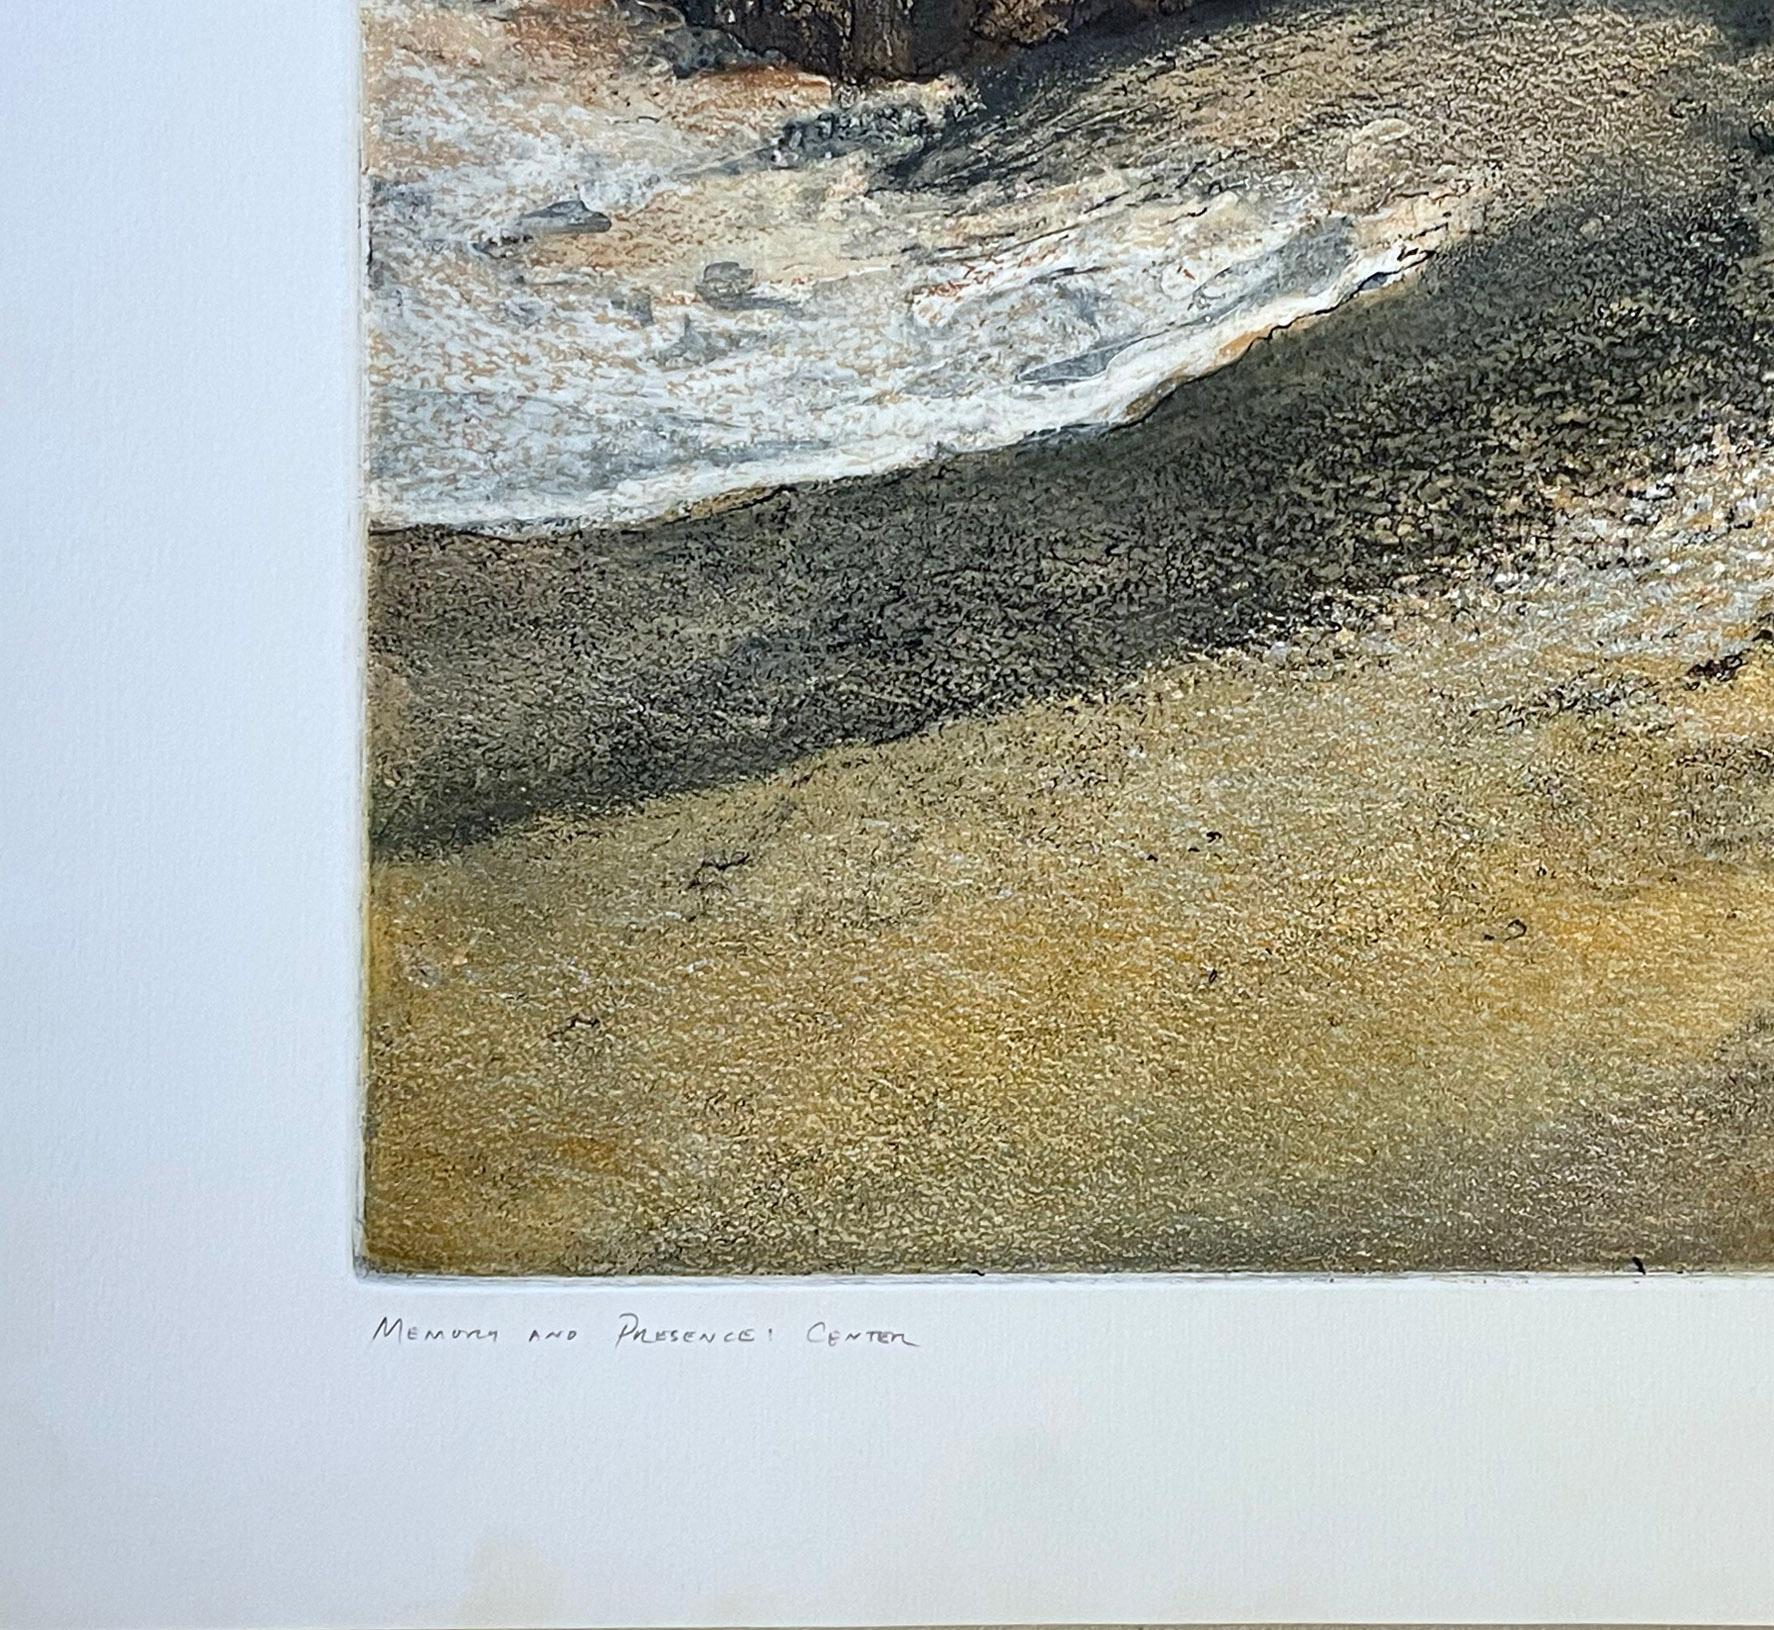 Memory and Presence (middle) - Gray Landscape Print by Art Werger